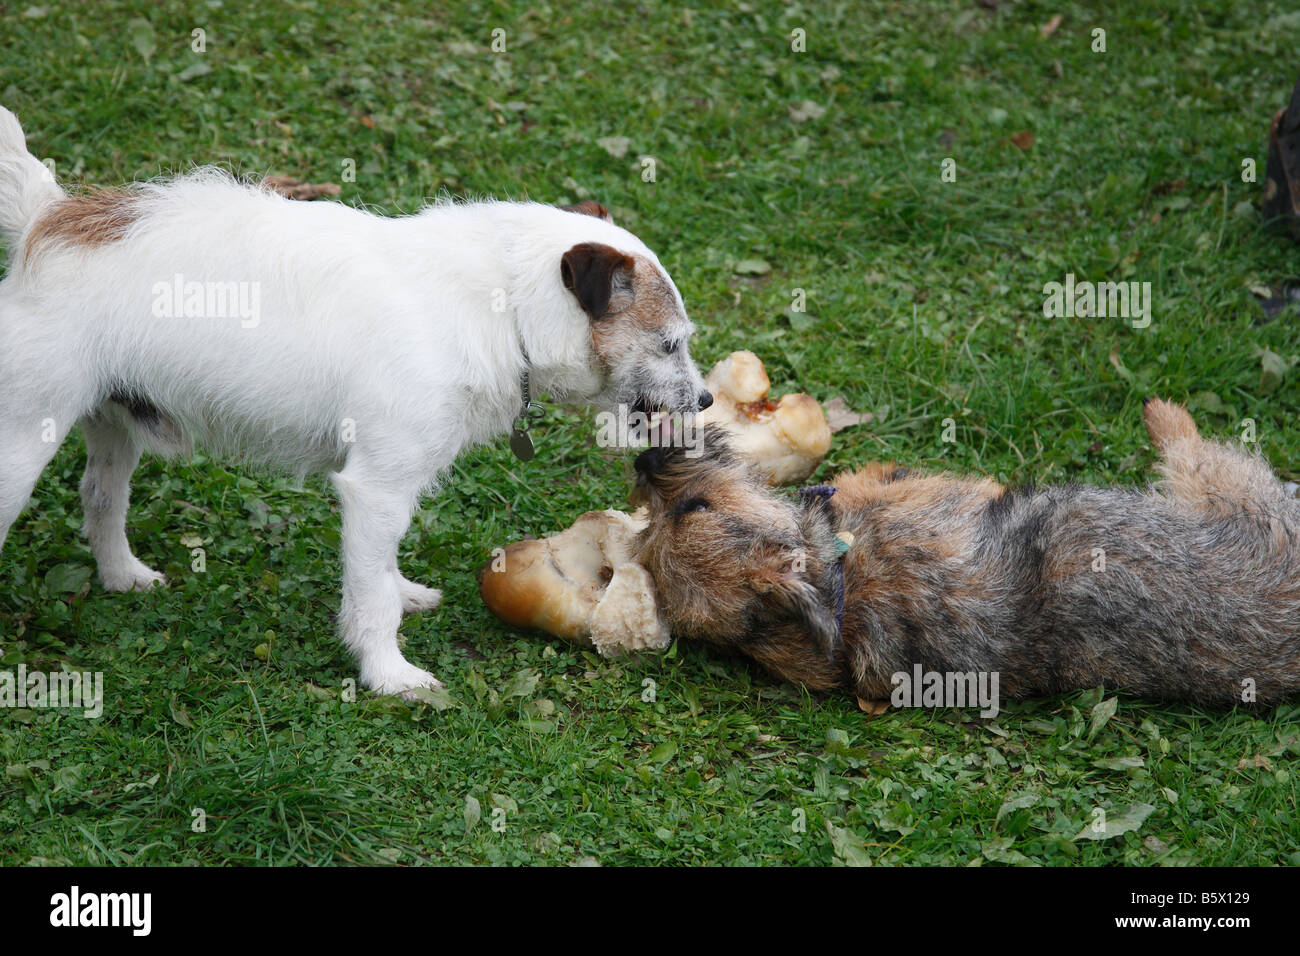 JACK RUSSEL AND SUBMISSIVE BORDER TERRIER WITH BONE Stock Photo